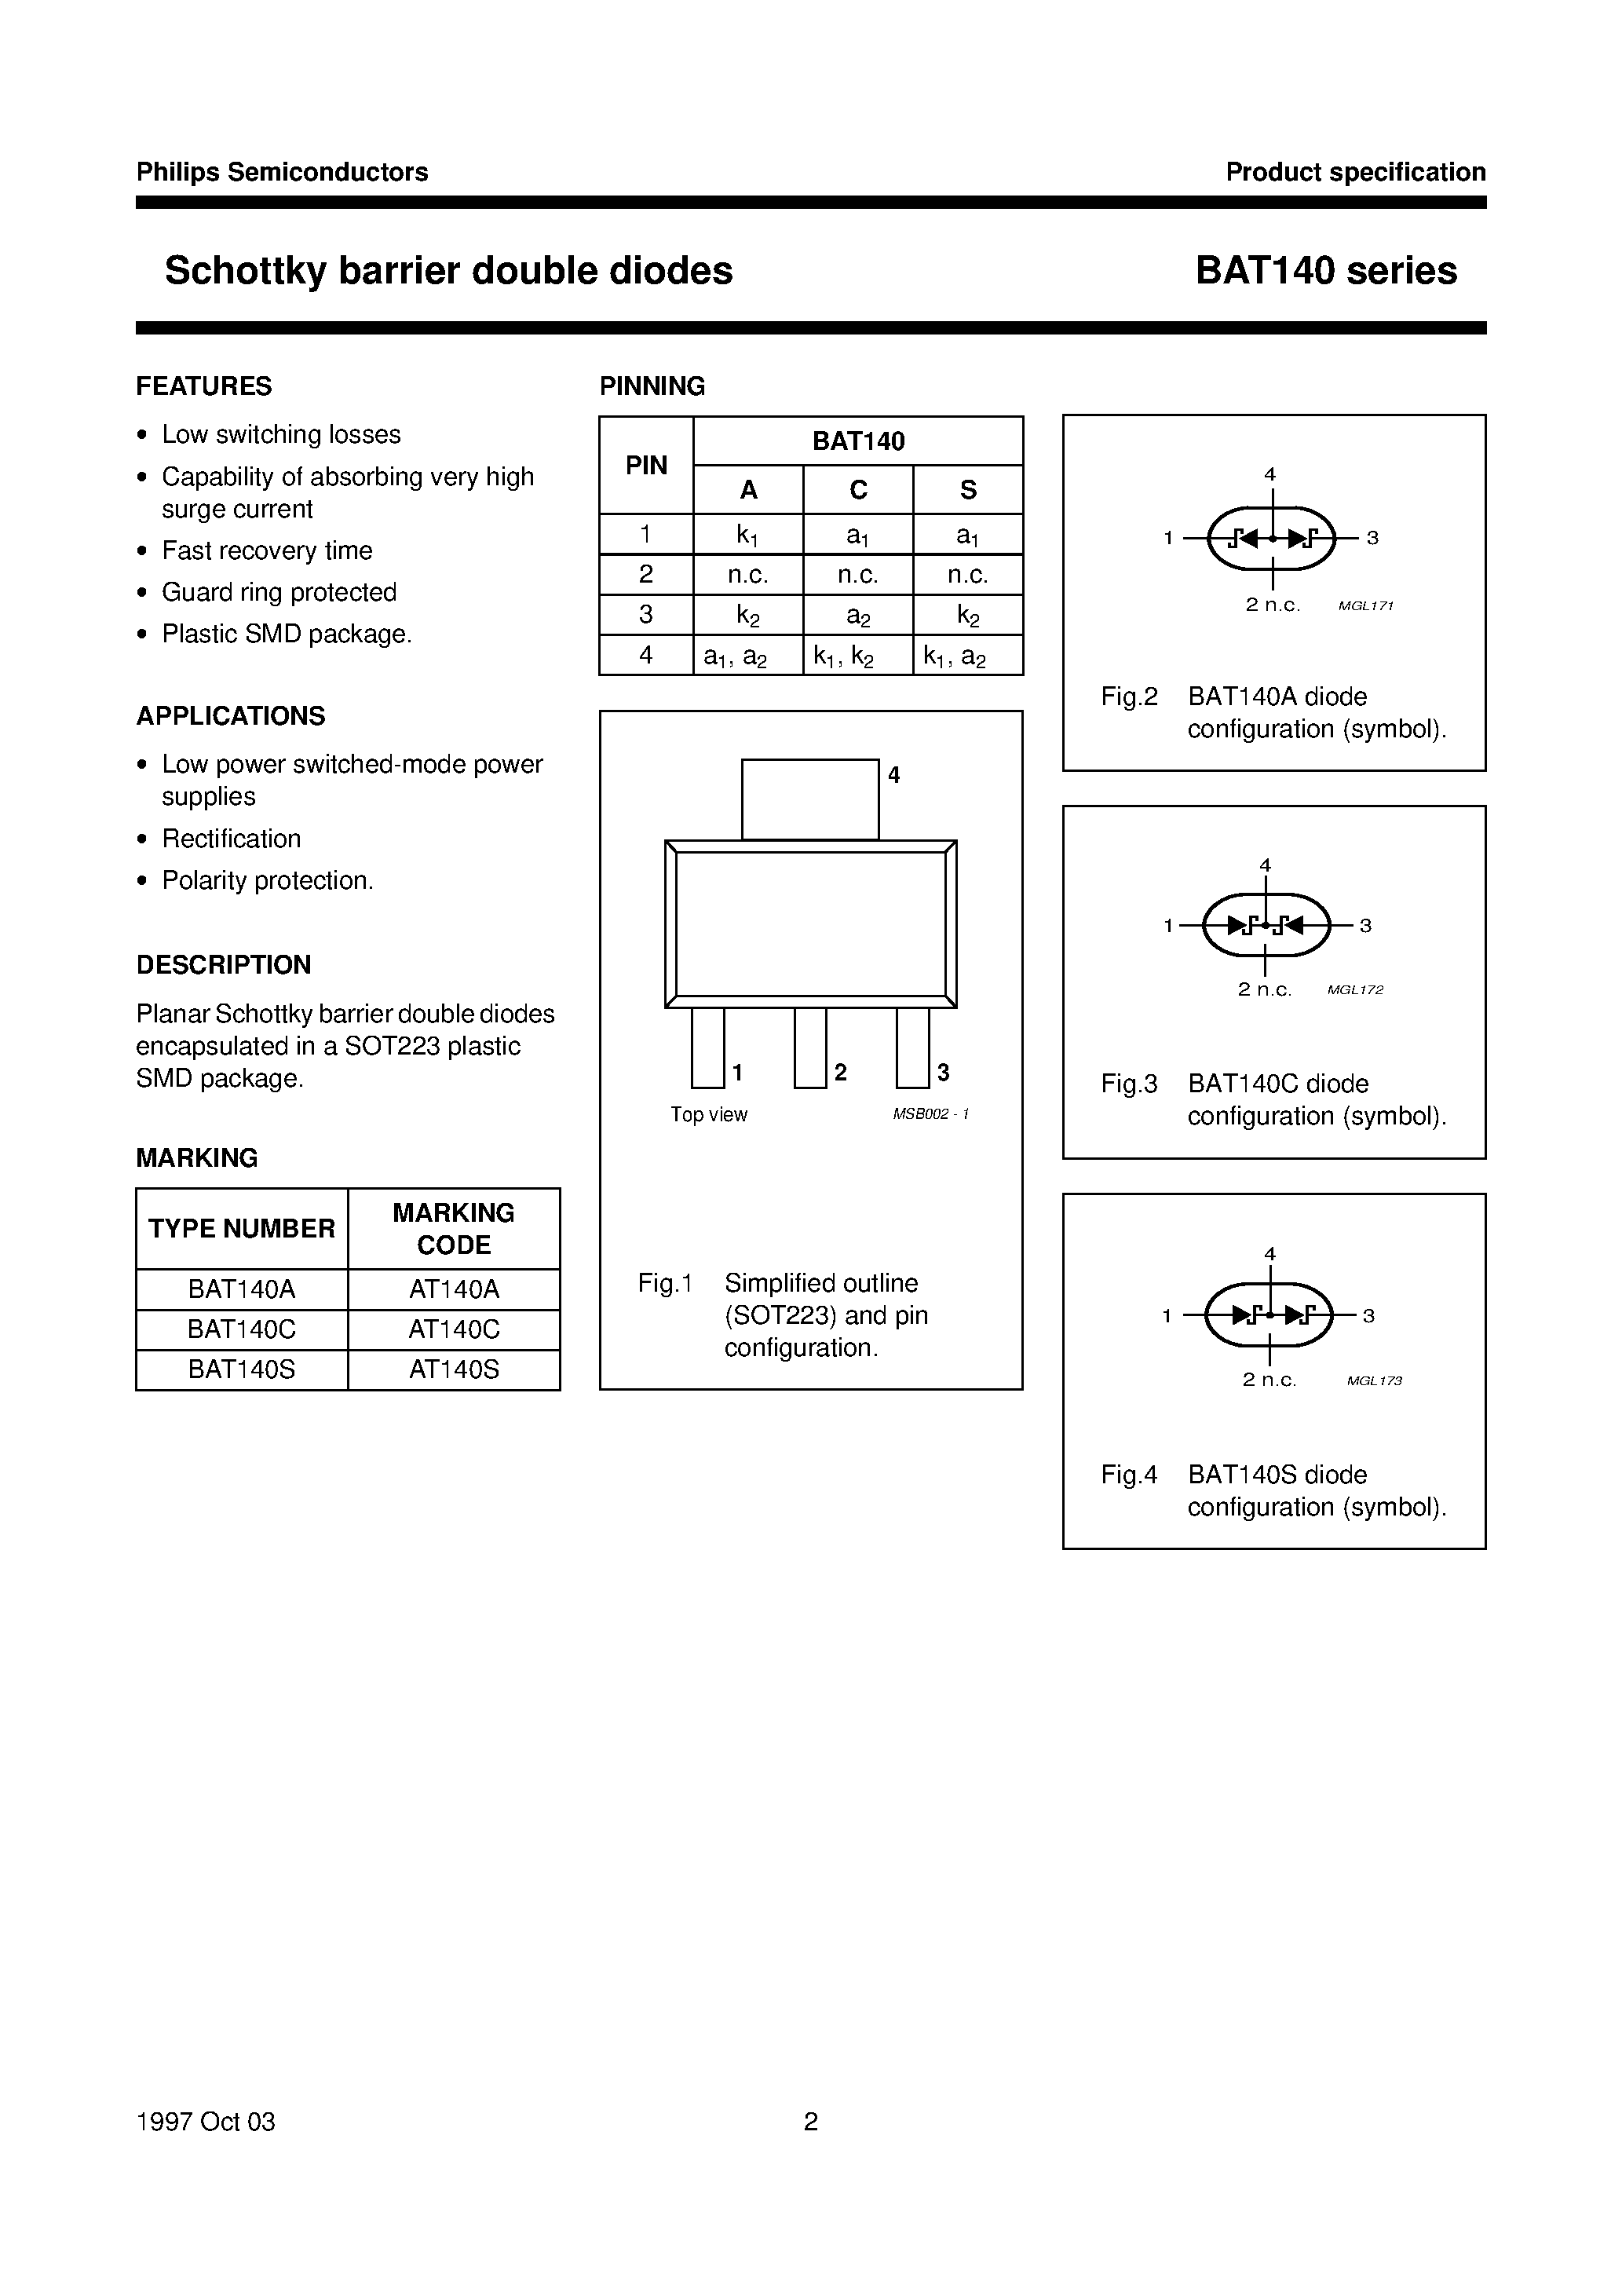 Datasheet BAT140S - Schottky barrier double diodes page 2